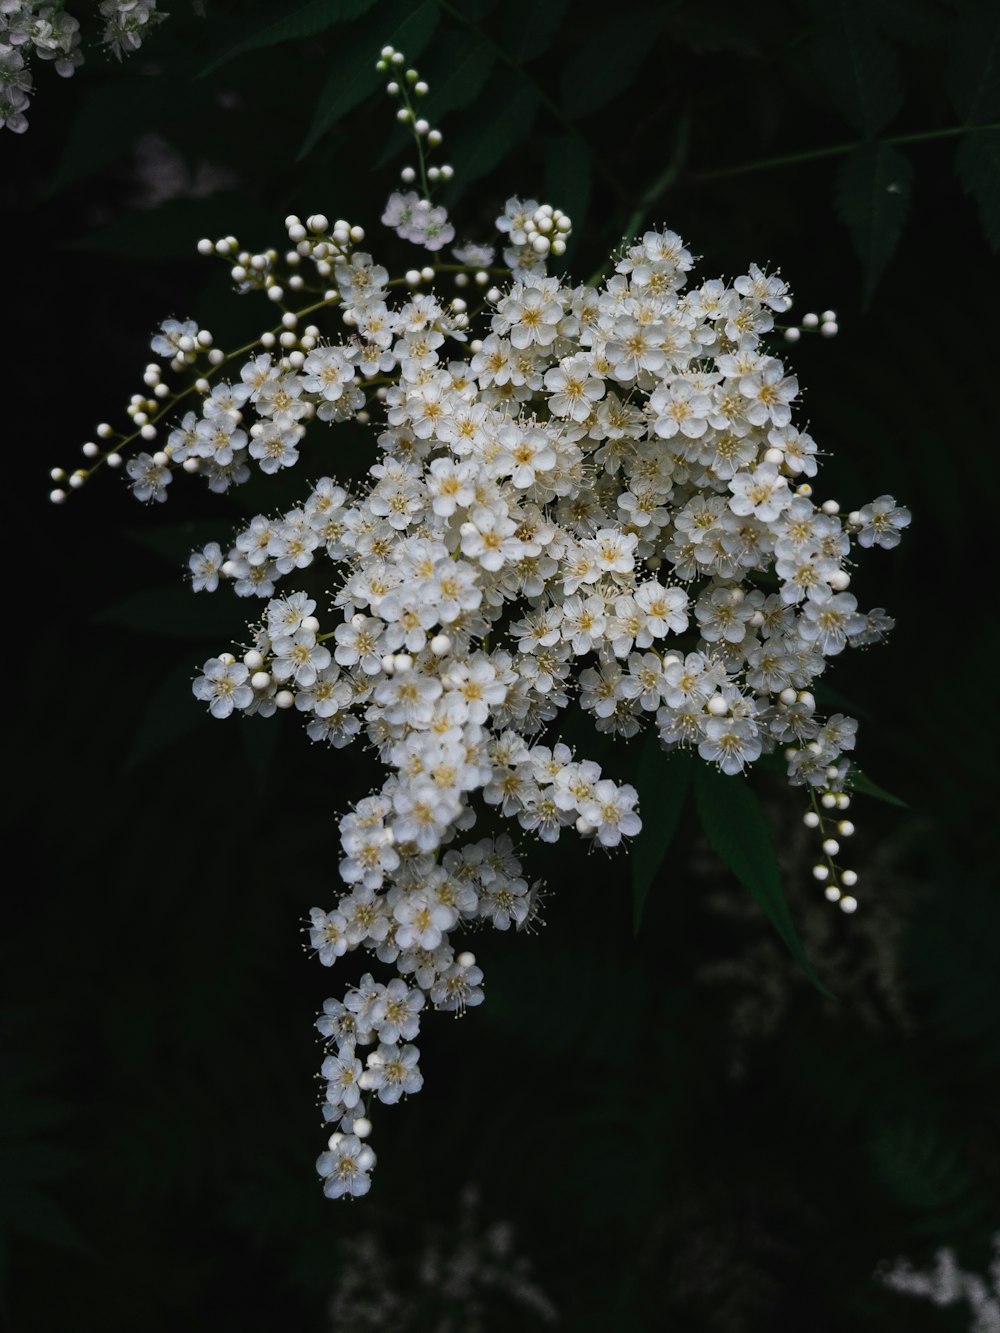 a close up of a white flower